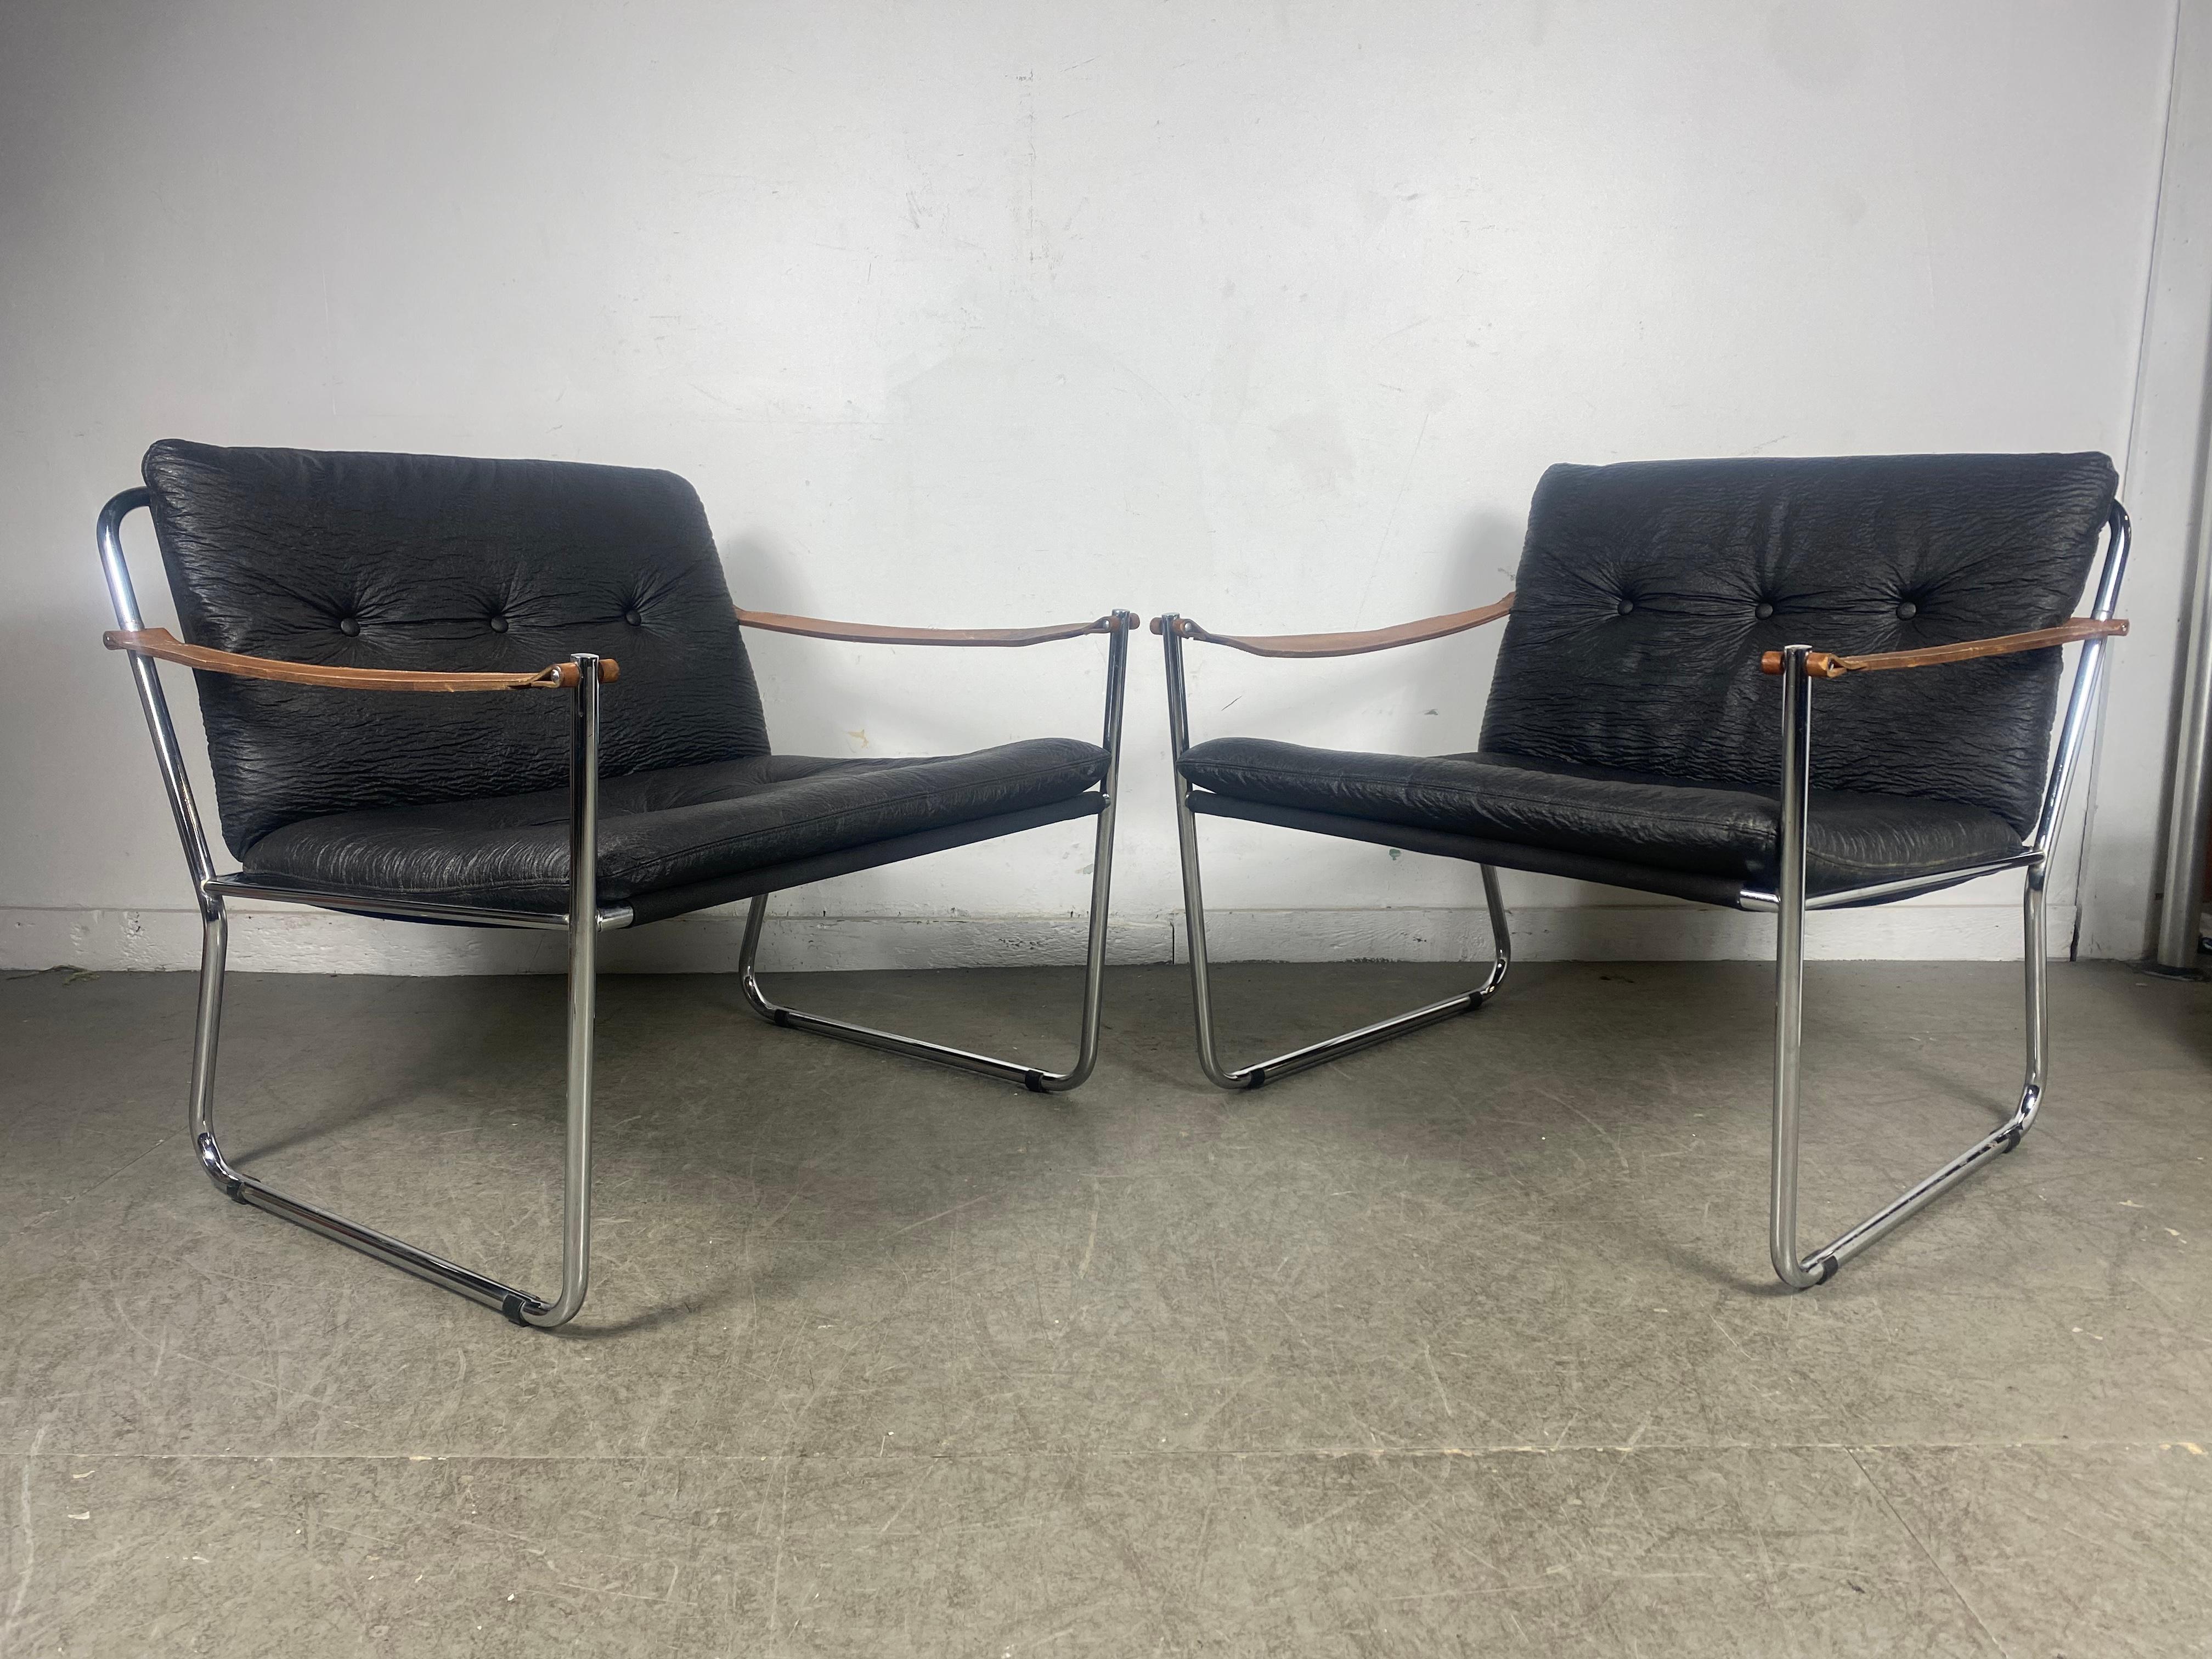 Late 20th Century Pair Modernist Lc1 Safari Style Leather Strap Arm /Chrome Frame Sling Chairs